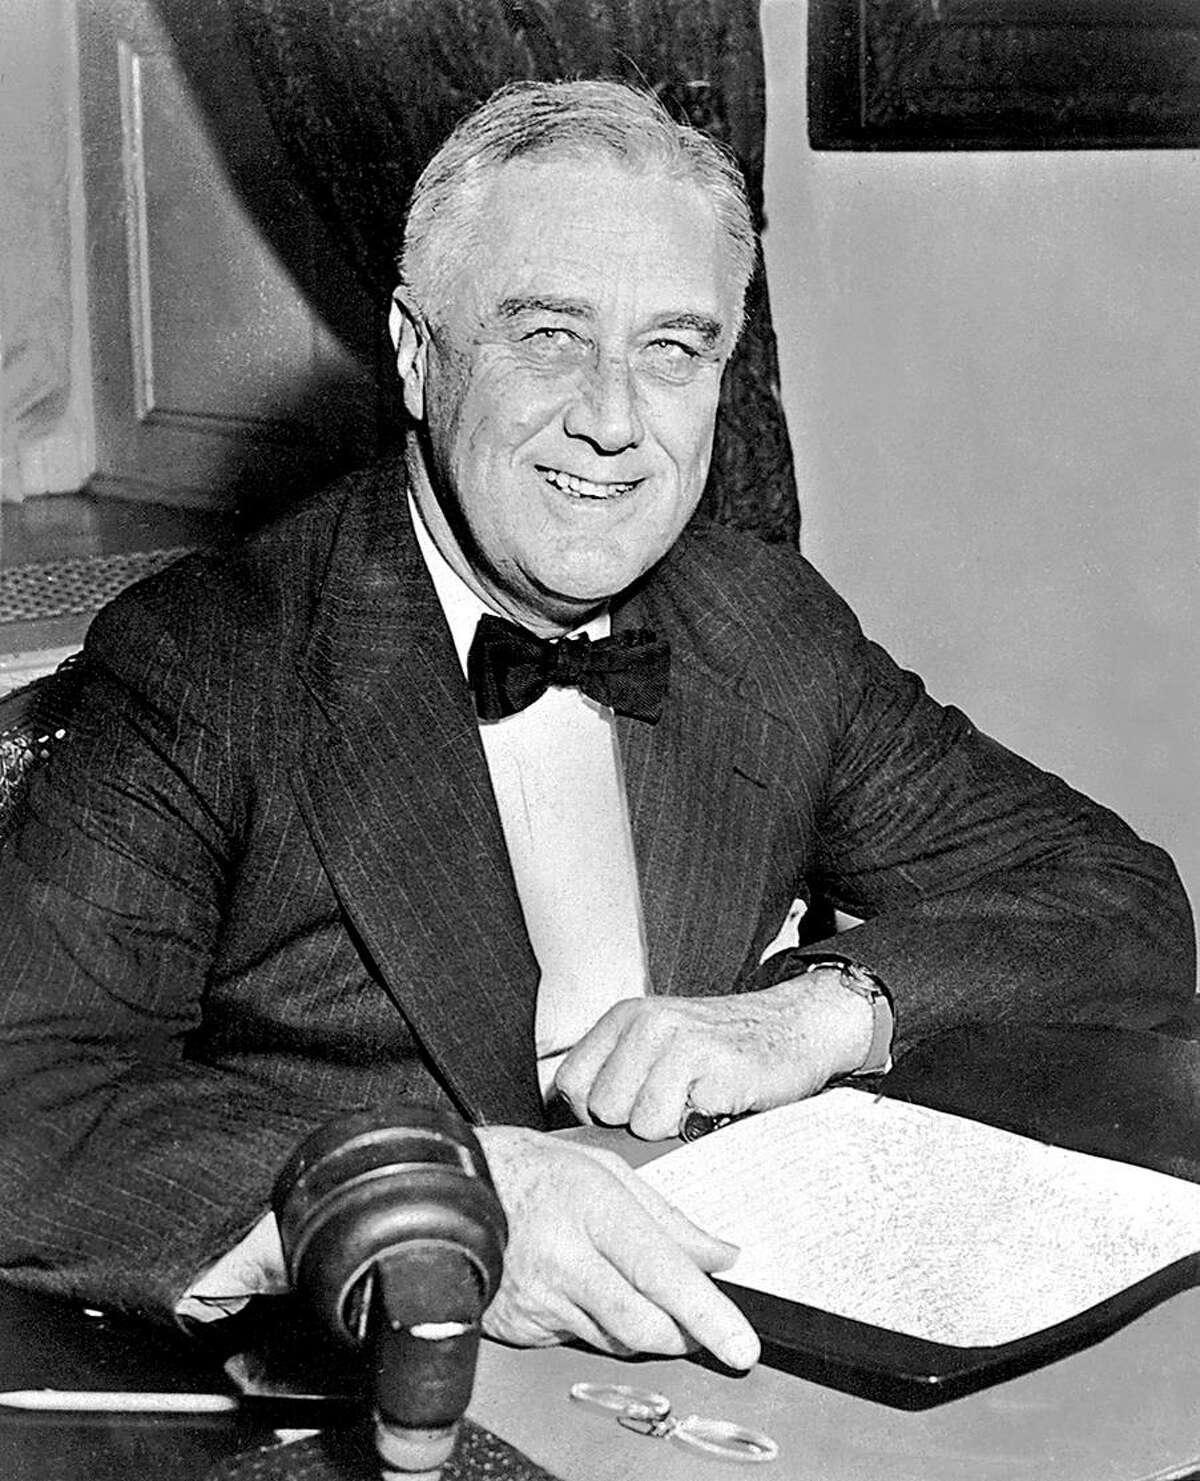 President Franklin D. Roosevelt, frustrated with the Supreme Court, at one point considered packing it.